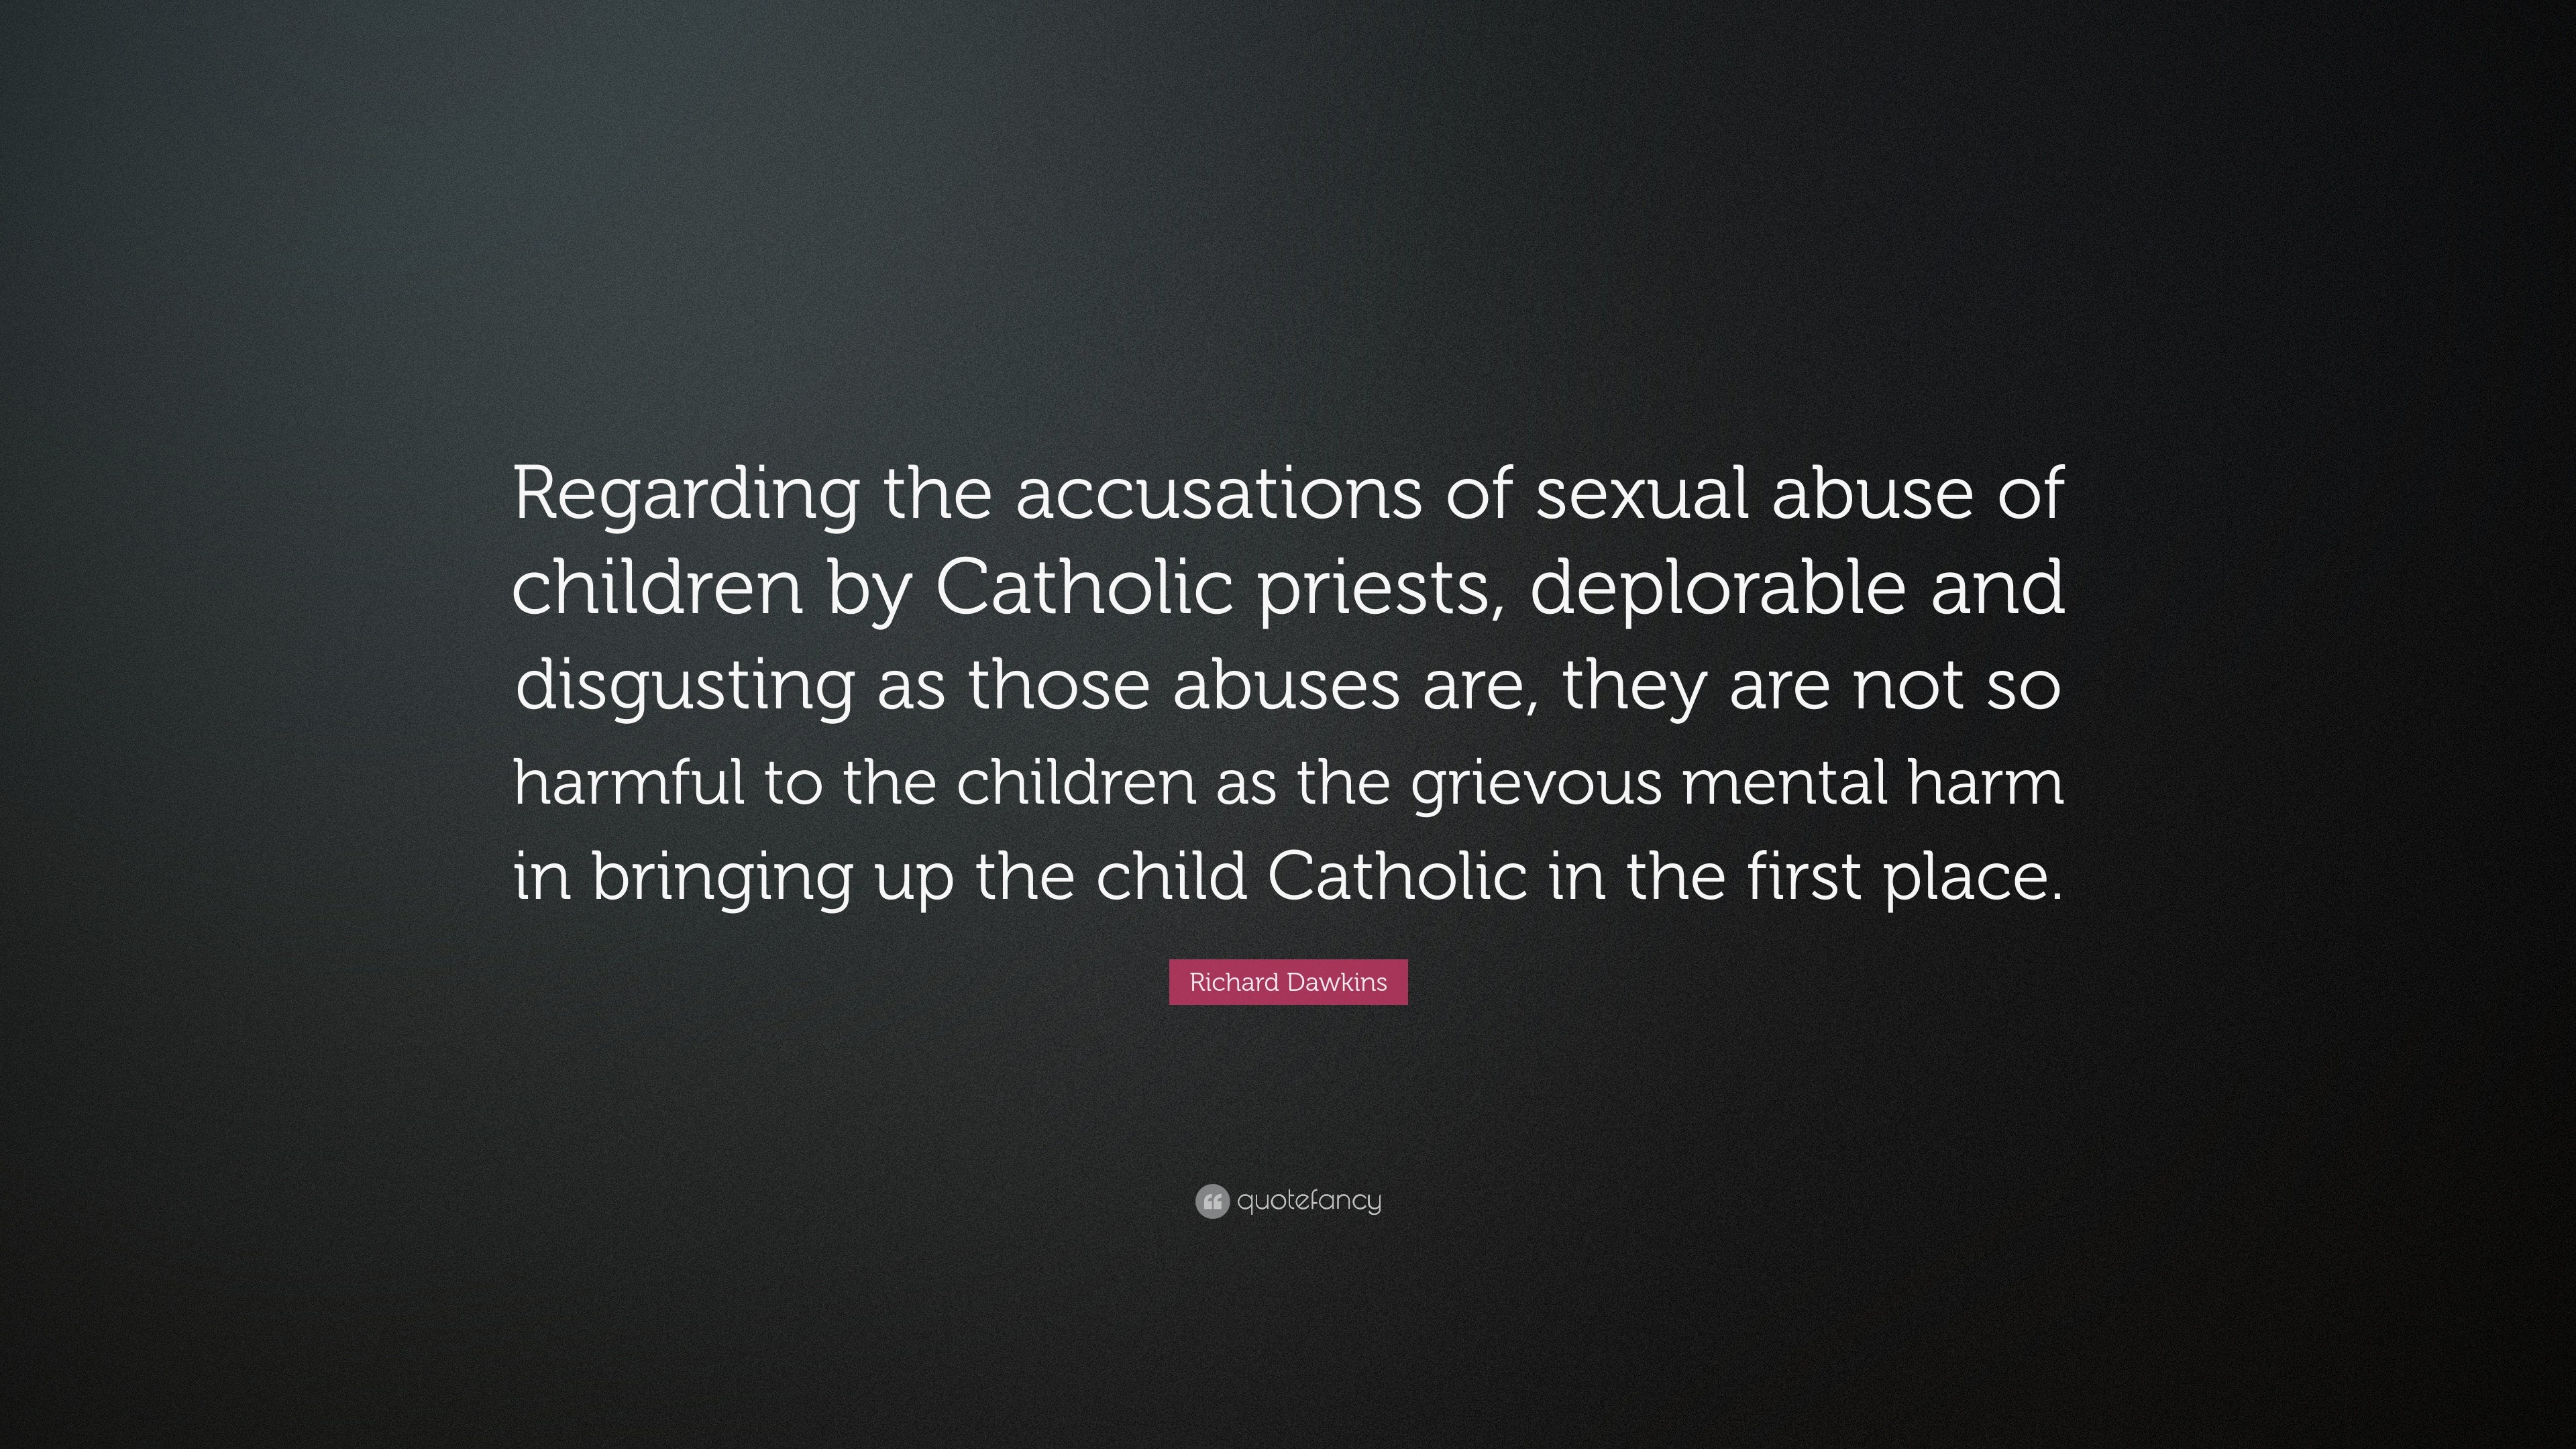 3840x2160 Richard Dawkins Quote: “Regarding the accusations of sexual abuse of  children by Catholic priests